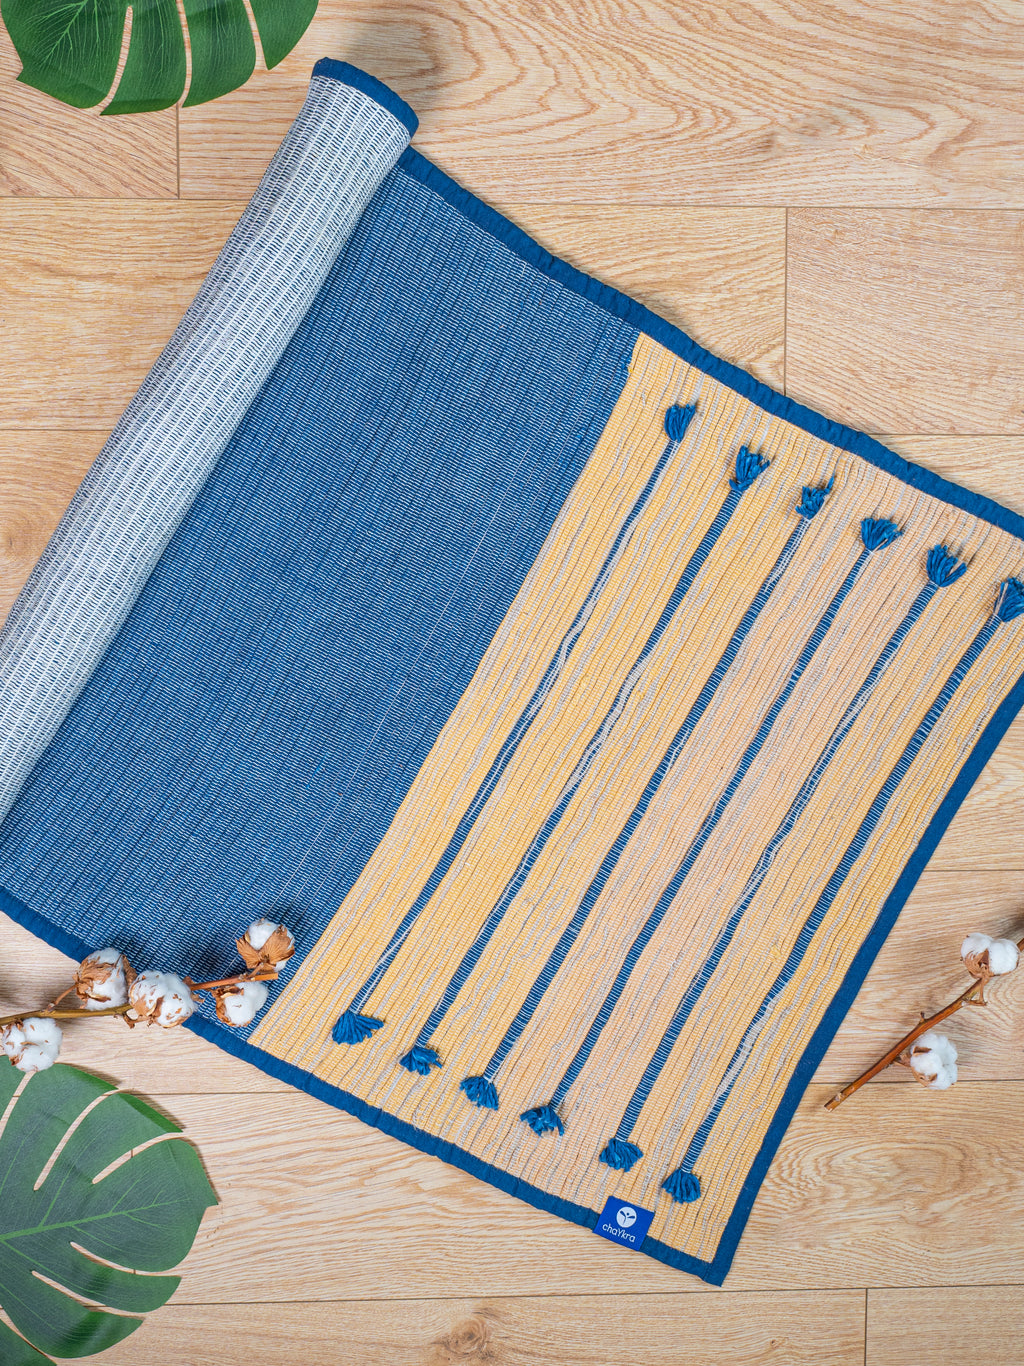 Experience the Art of Yoga with a Handloom Cotton Mat - VNS Bazaar